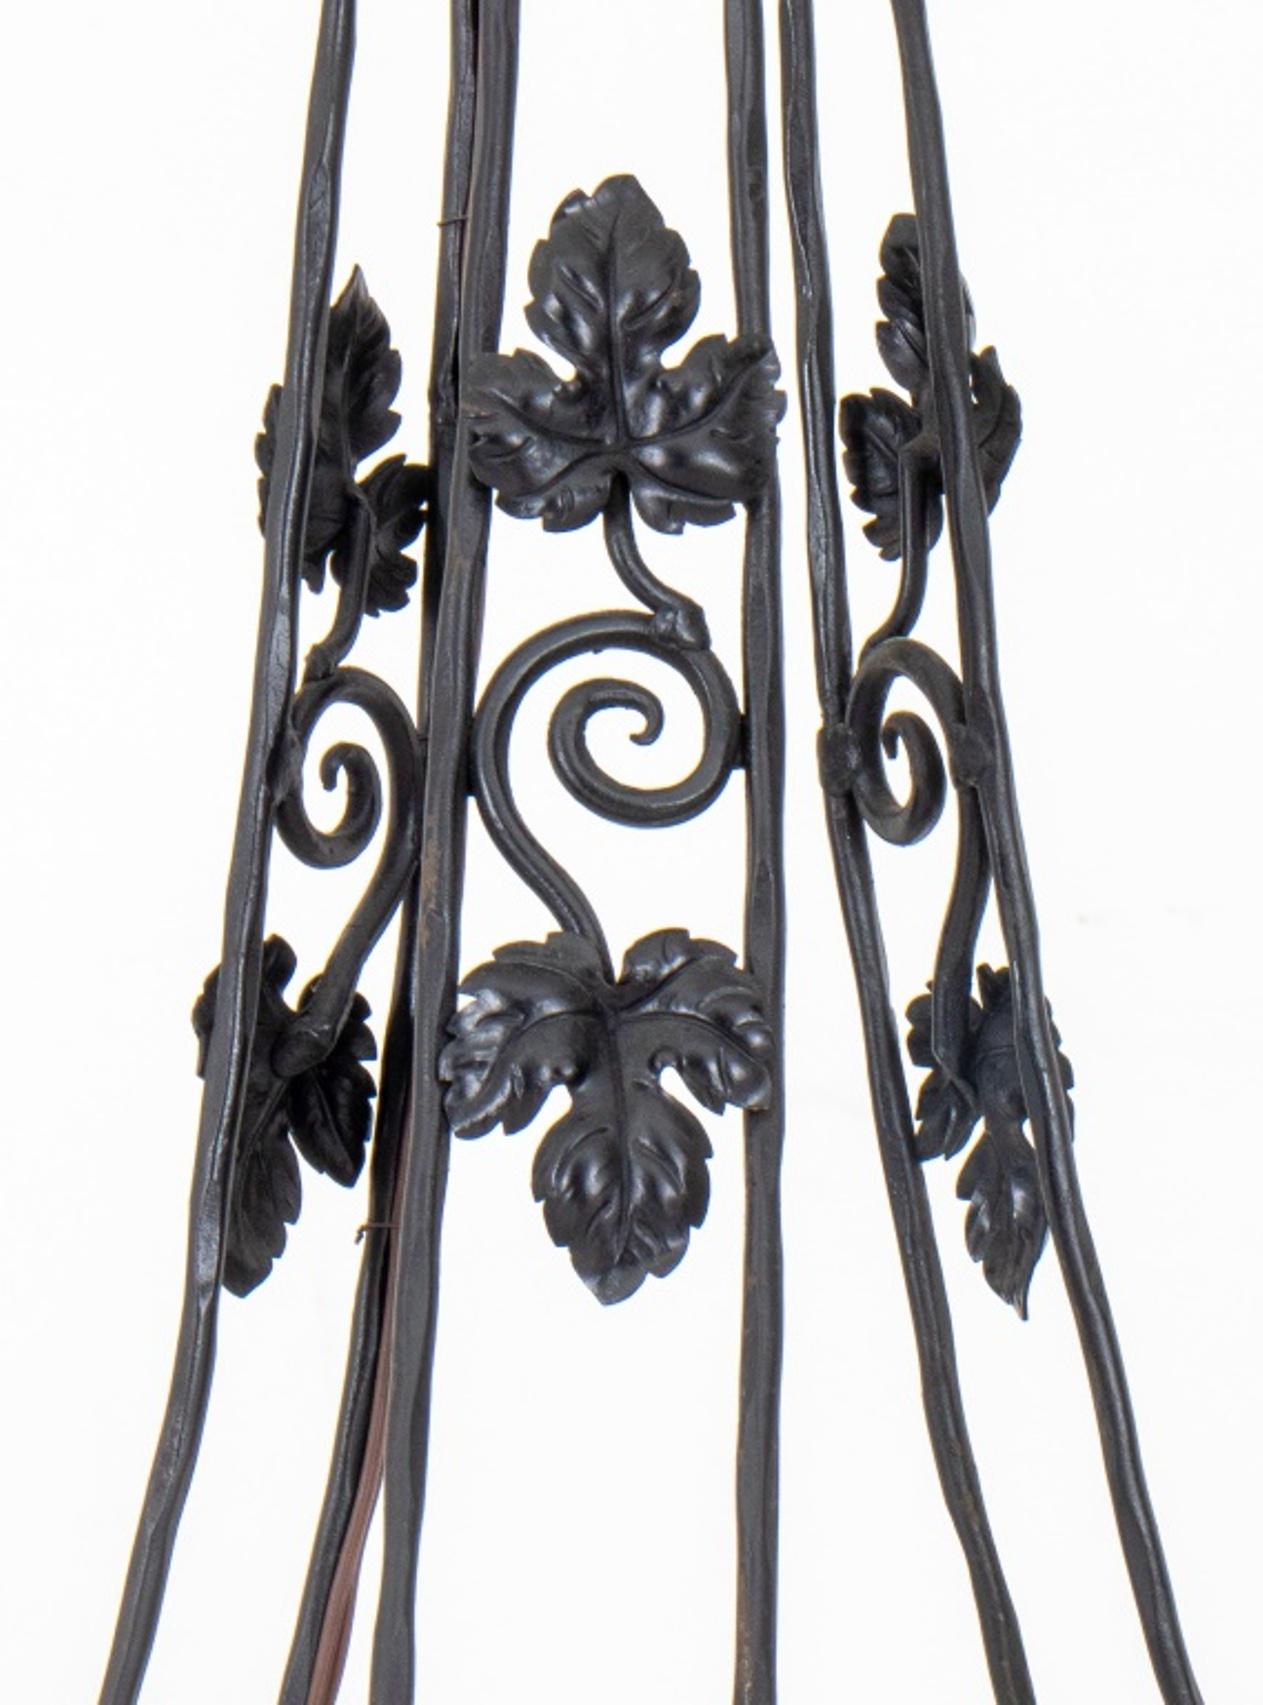 Art Deco manner wrought iron hall lantern in the manner of Muller Freres, with central matte colored glass bell within a cage form chandelier mount with wrought iron ivy or chestnut leaf motifs.

Dimensions: 38